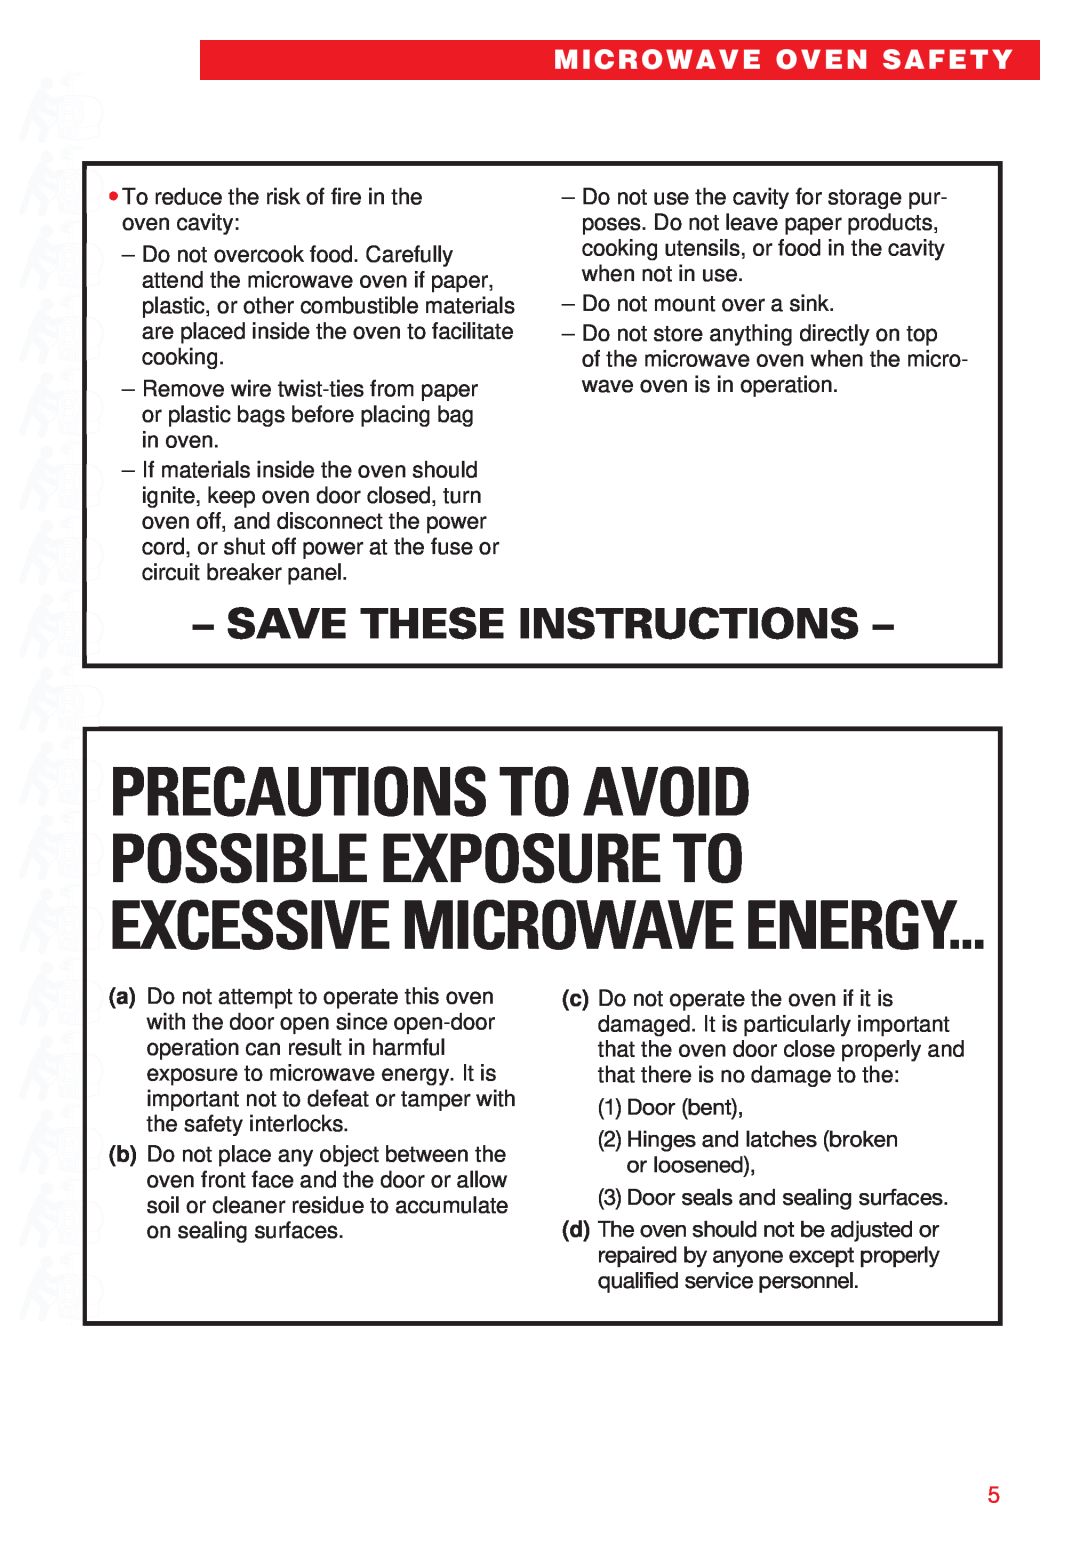 Whirlpool MT8066SE, MT8068SE Precautions To Avoid, Microwave Oven Safety, Possible Exposure To Excessive Microwave Energy 